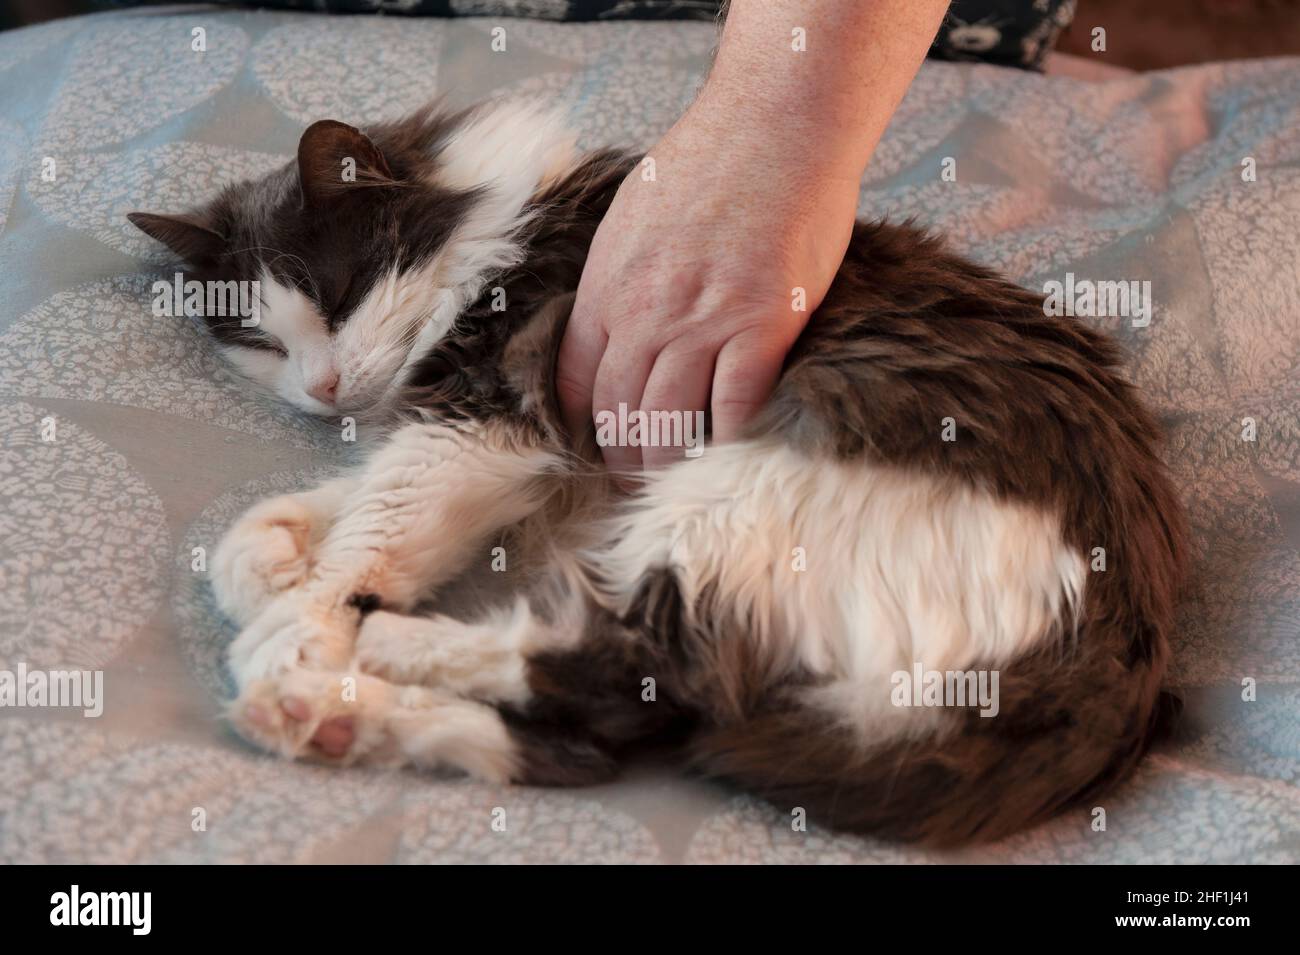 Cat lying on bed being stroked by male hand. Stock Photo